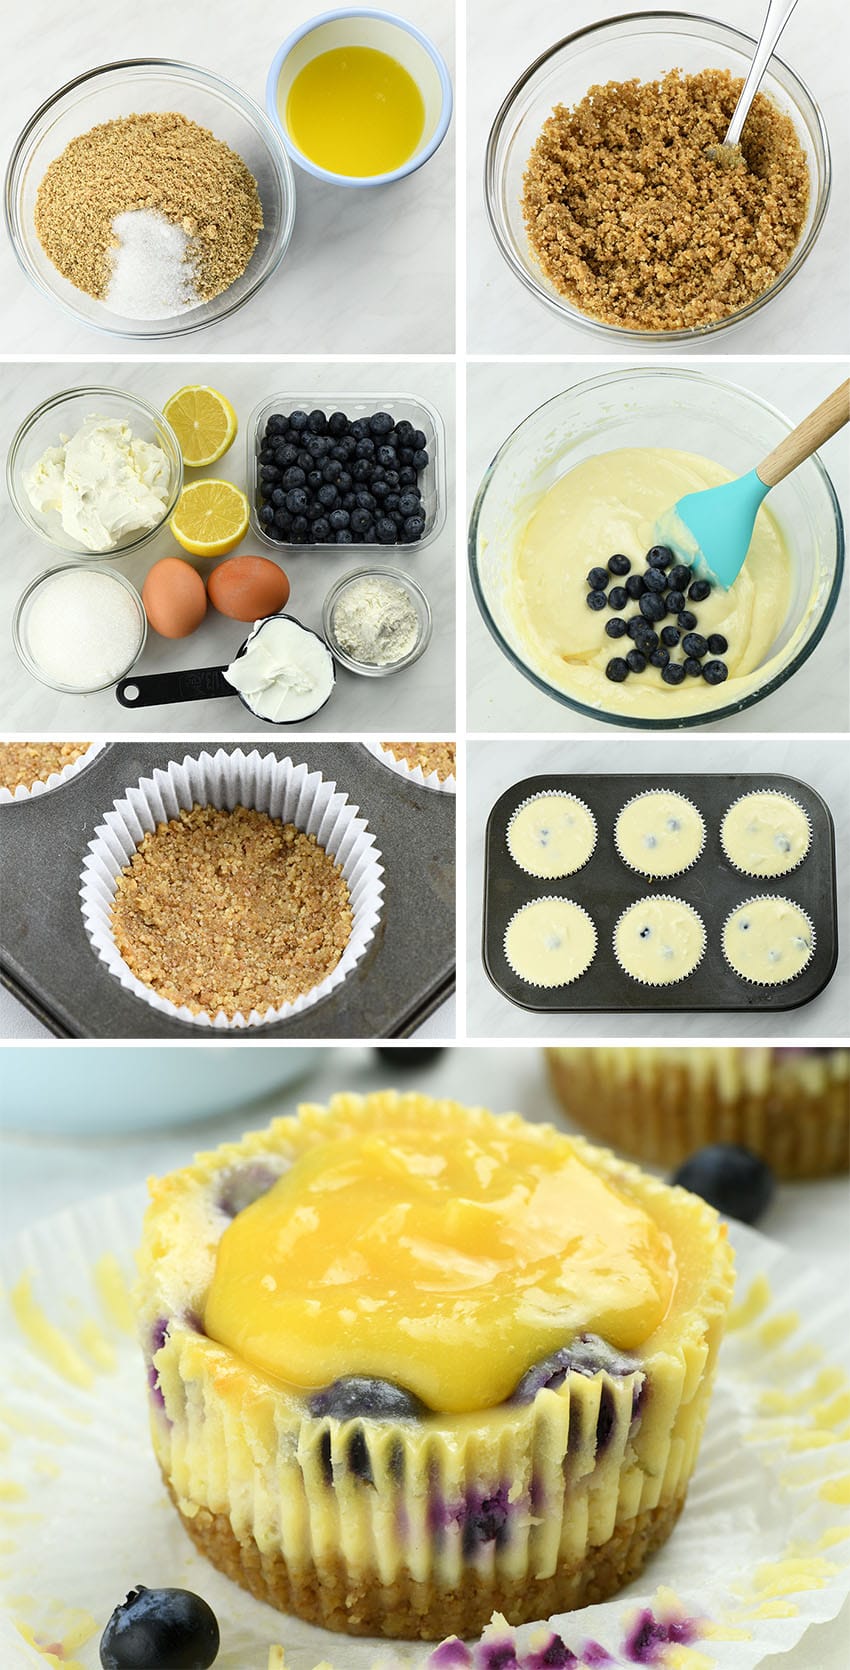 Mini Lemon Blueberry Cheesecakes step-by-step instructions.